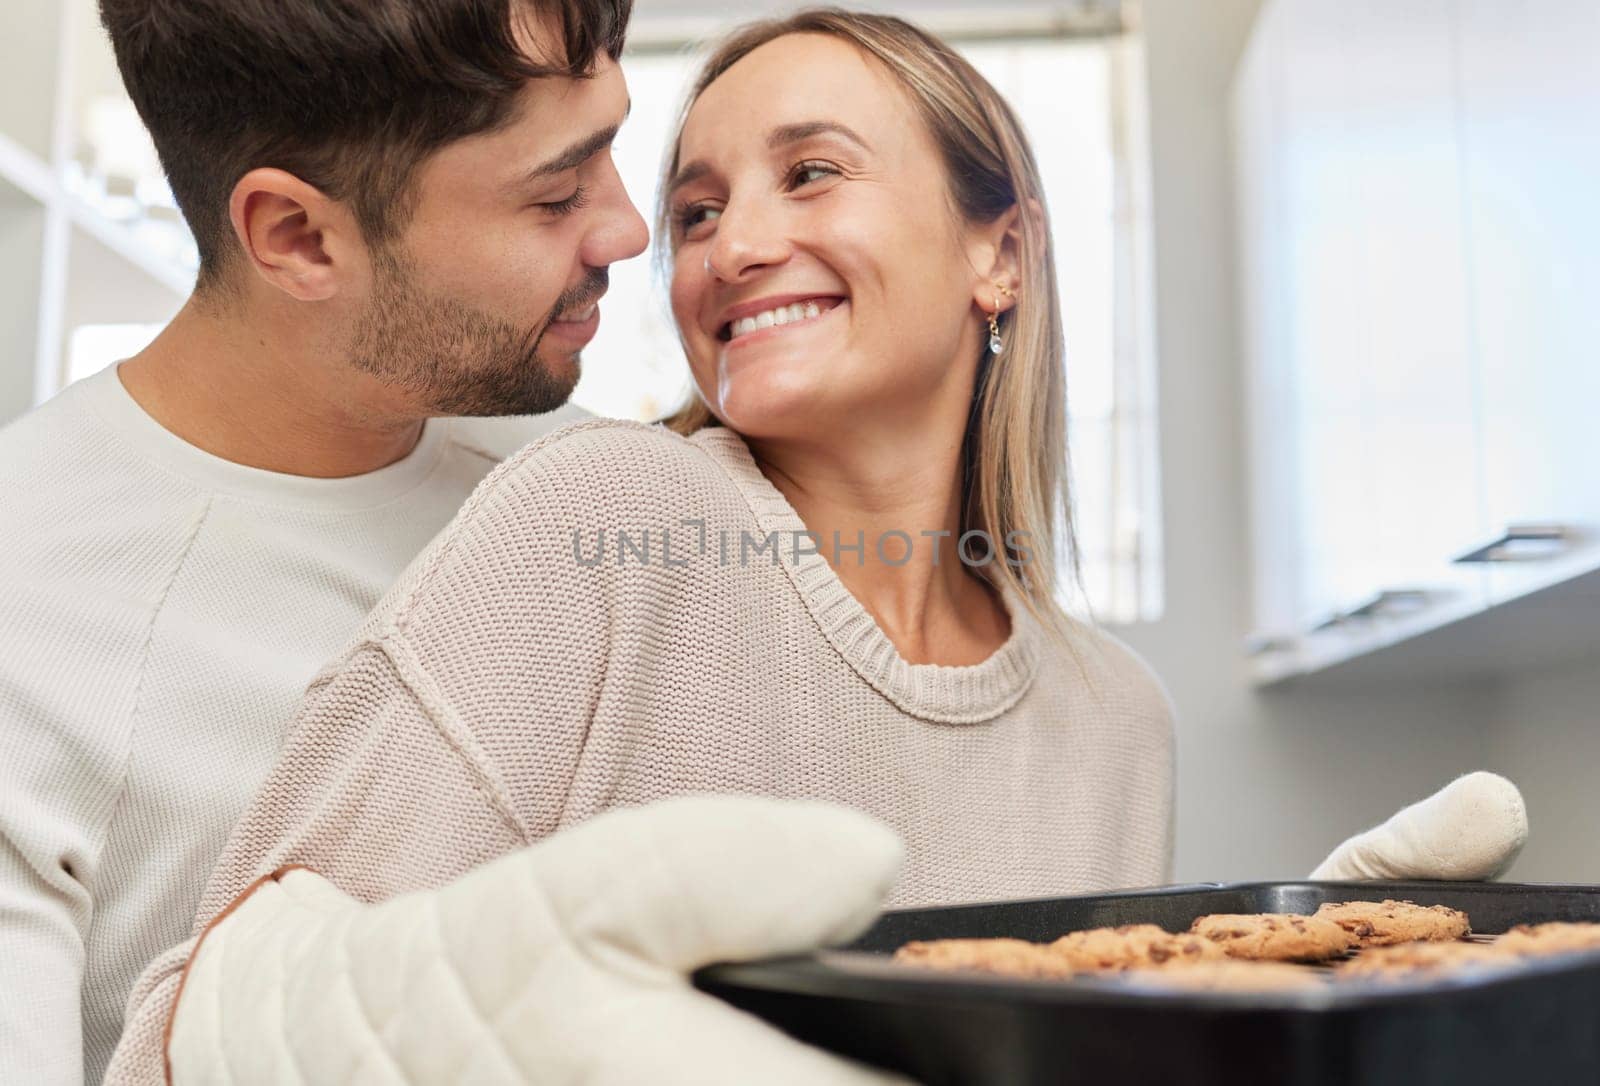 Love, kitchen and couple baking cookies together for fun, bonding and romance in their home. Bake smile and happy young man and woman preparing biscuits or snacks for party, event or dessert at house by YuriArcurs